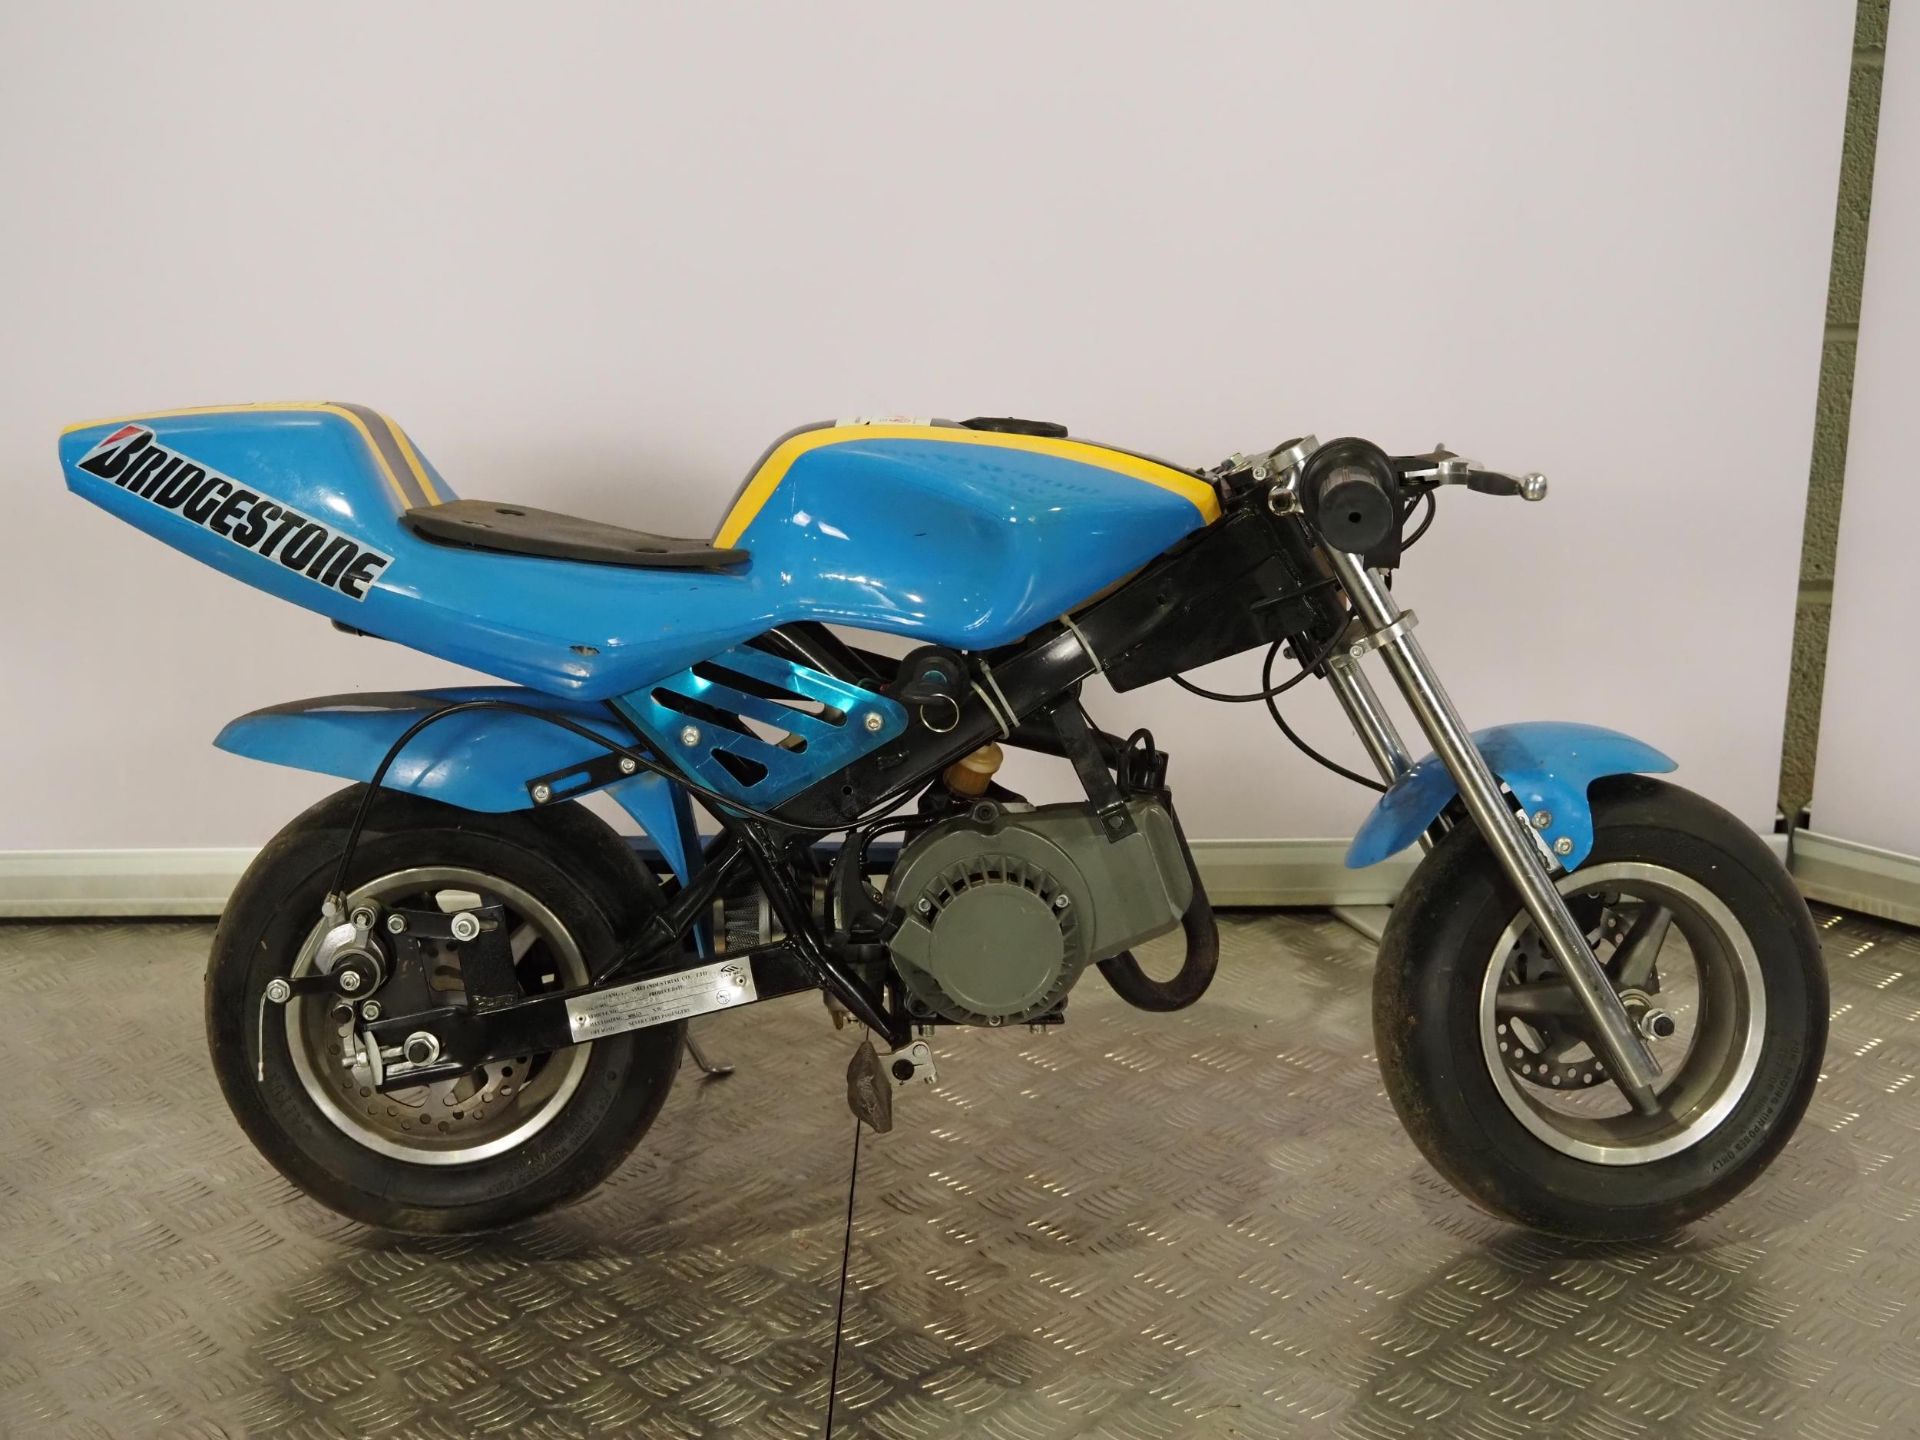 Mini Moto motorcycle in Rizzla blue livery. Runs and rides - Image 2 of 3